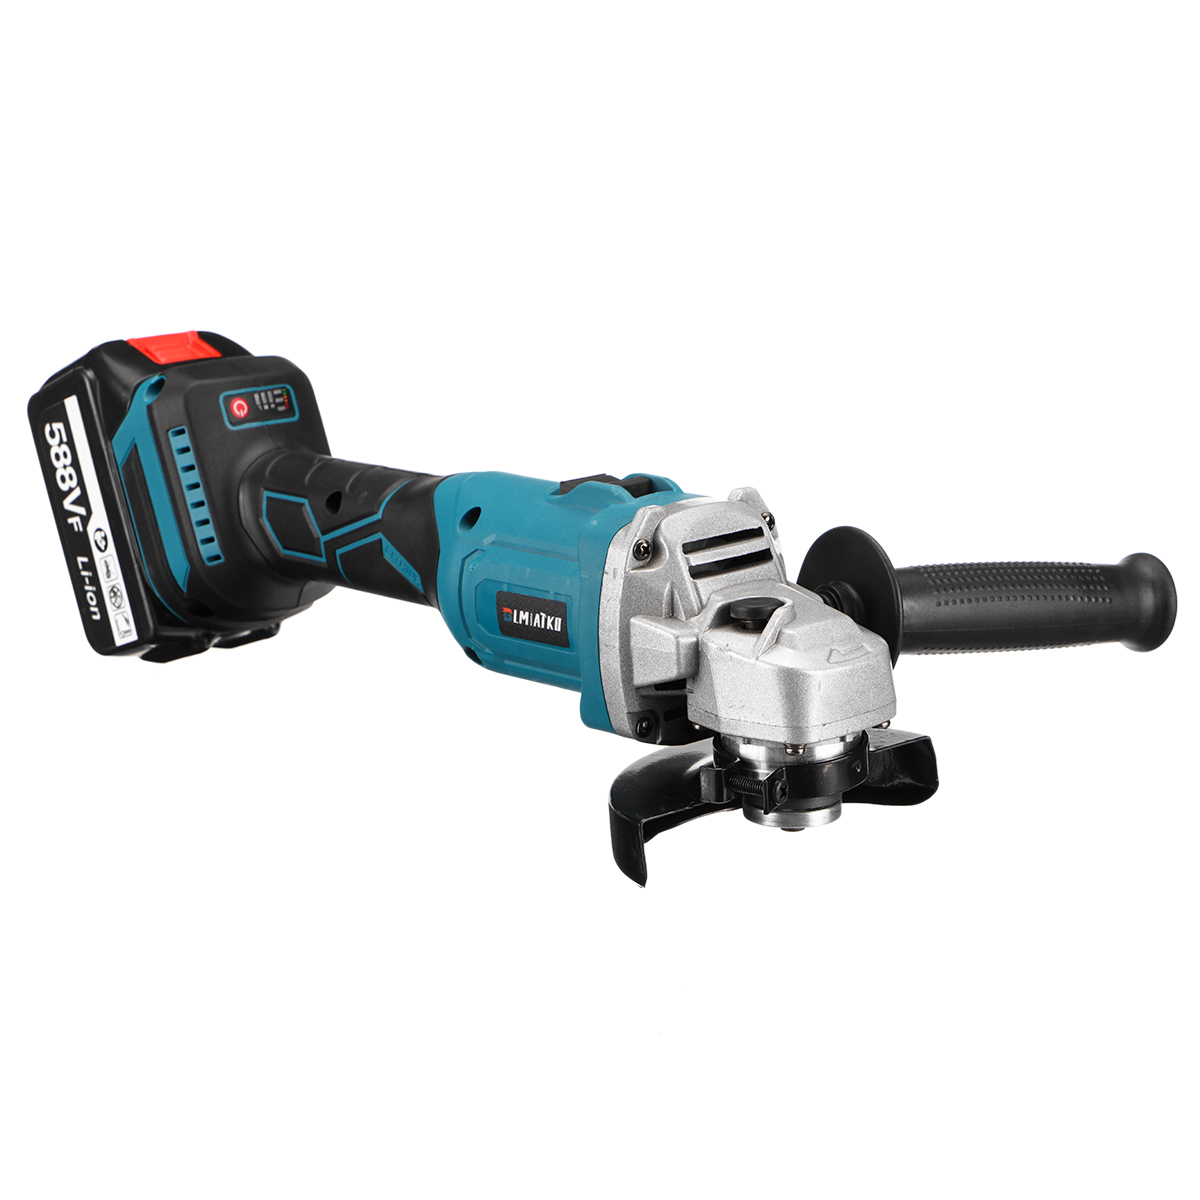 BLMIATKO-220V-125MM-100MM-34-Speed-Brushless-Electric-Angle-Grinder-Cutting-Grinding-Machine-Power-T-1943200-6